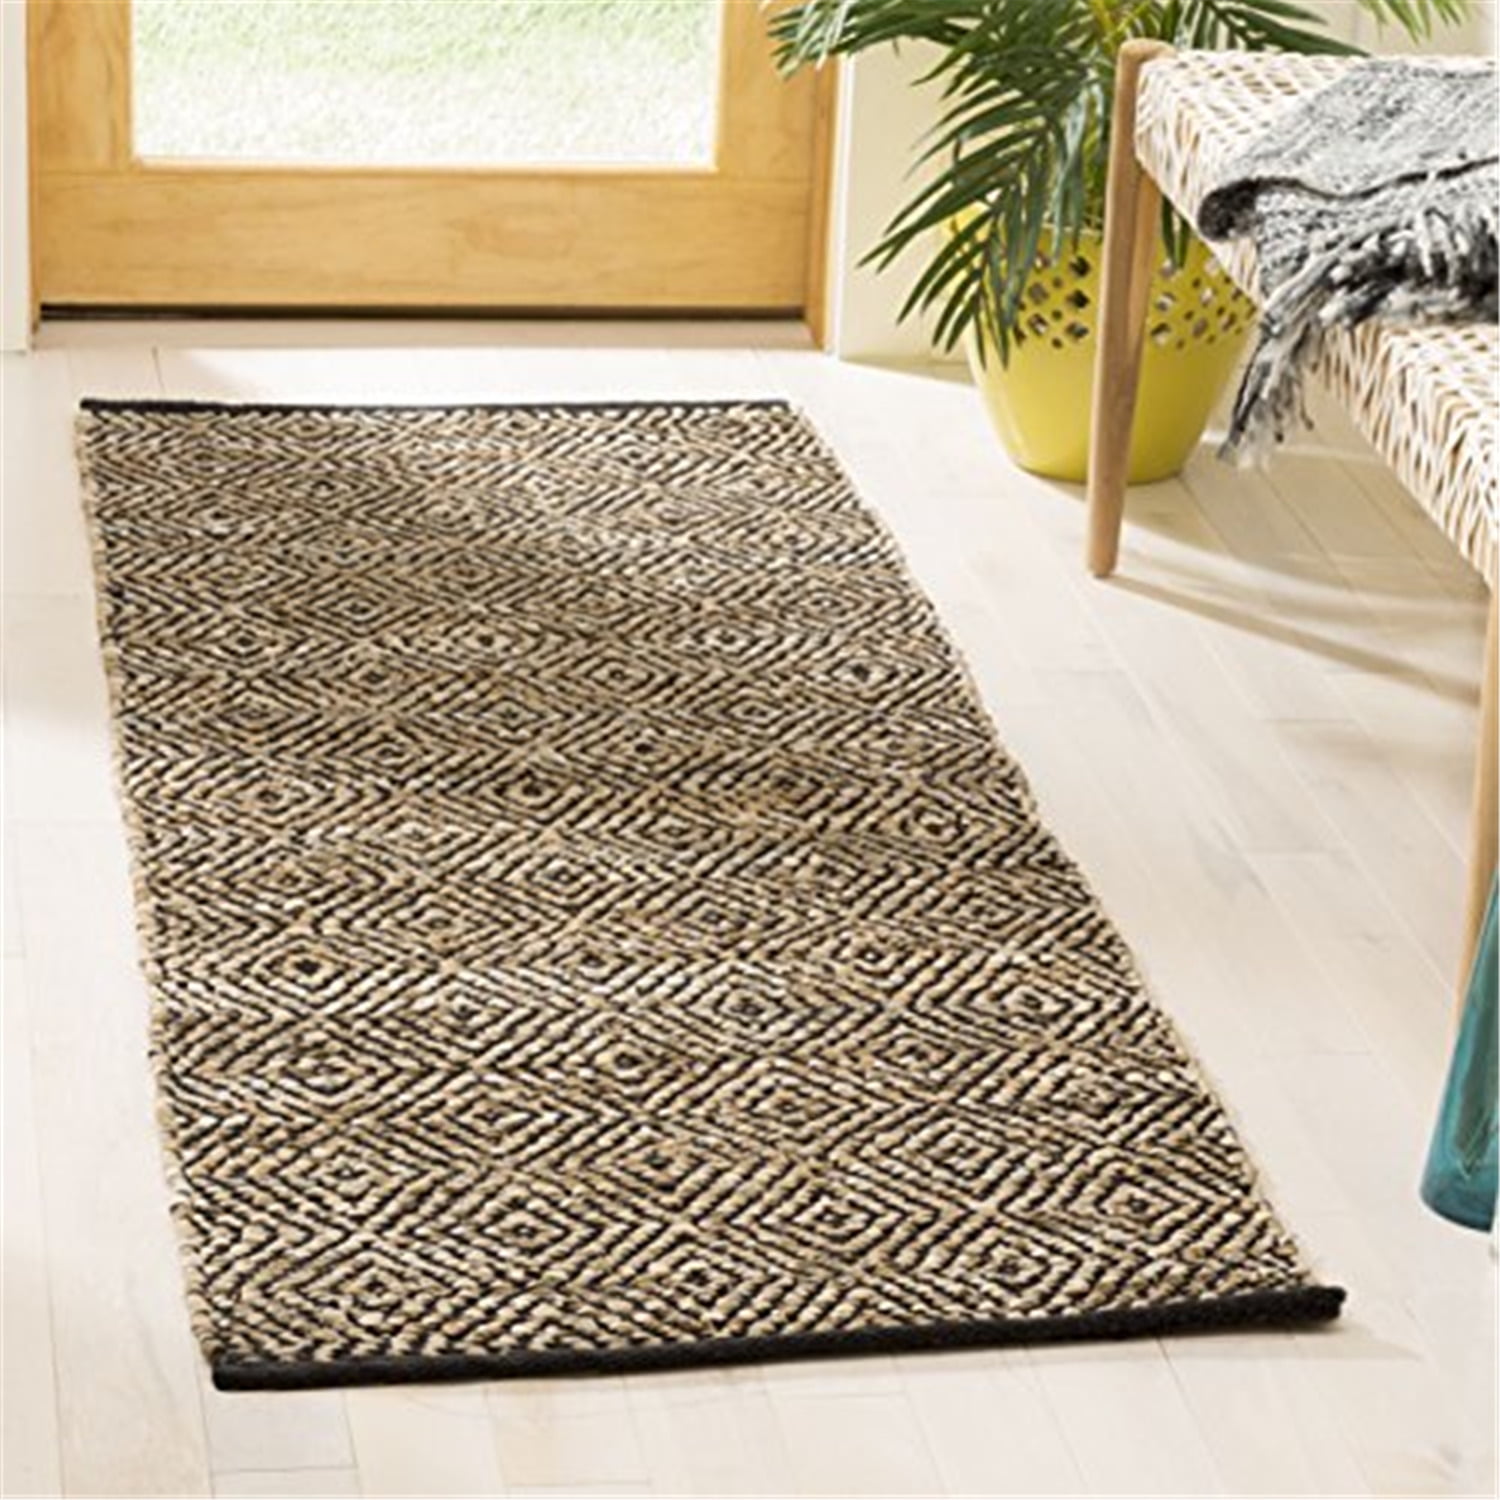 24"x72" Rag Rug Runner in Sage Green Cotton Great Throw Rug for High Traffic 